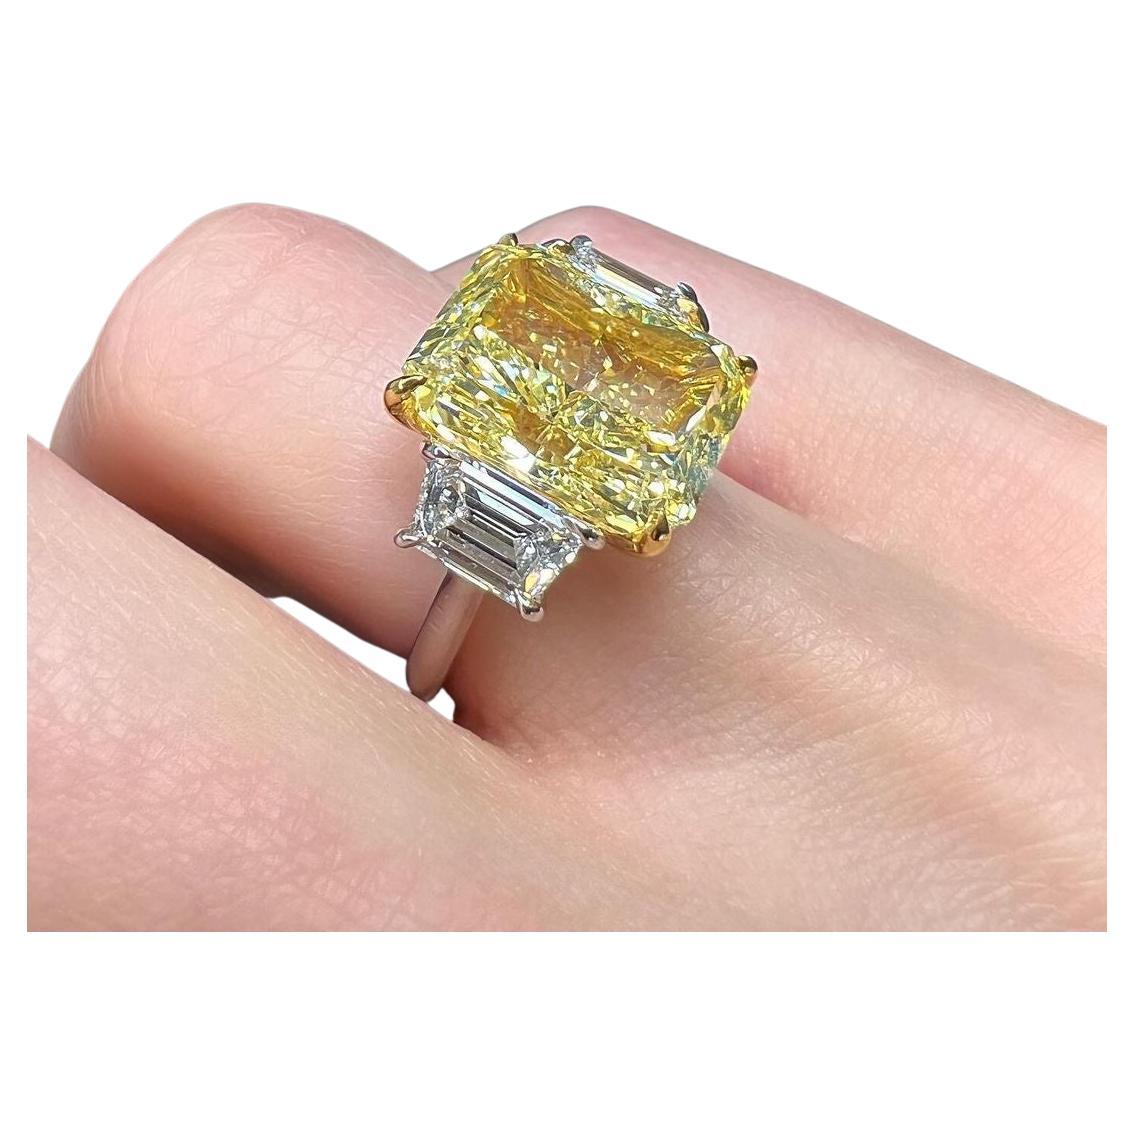 This fancy yellow radiant cut diamond is offered by Antinori di Sanpietro ROMA. This 4ct fancy light yellow radiant diamond is custom set in a handcrafted Antinori di Sanpietro ROMA platinum and 18 karat yellow gold. 3 stone ring consisting of 1